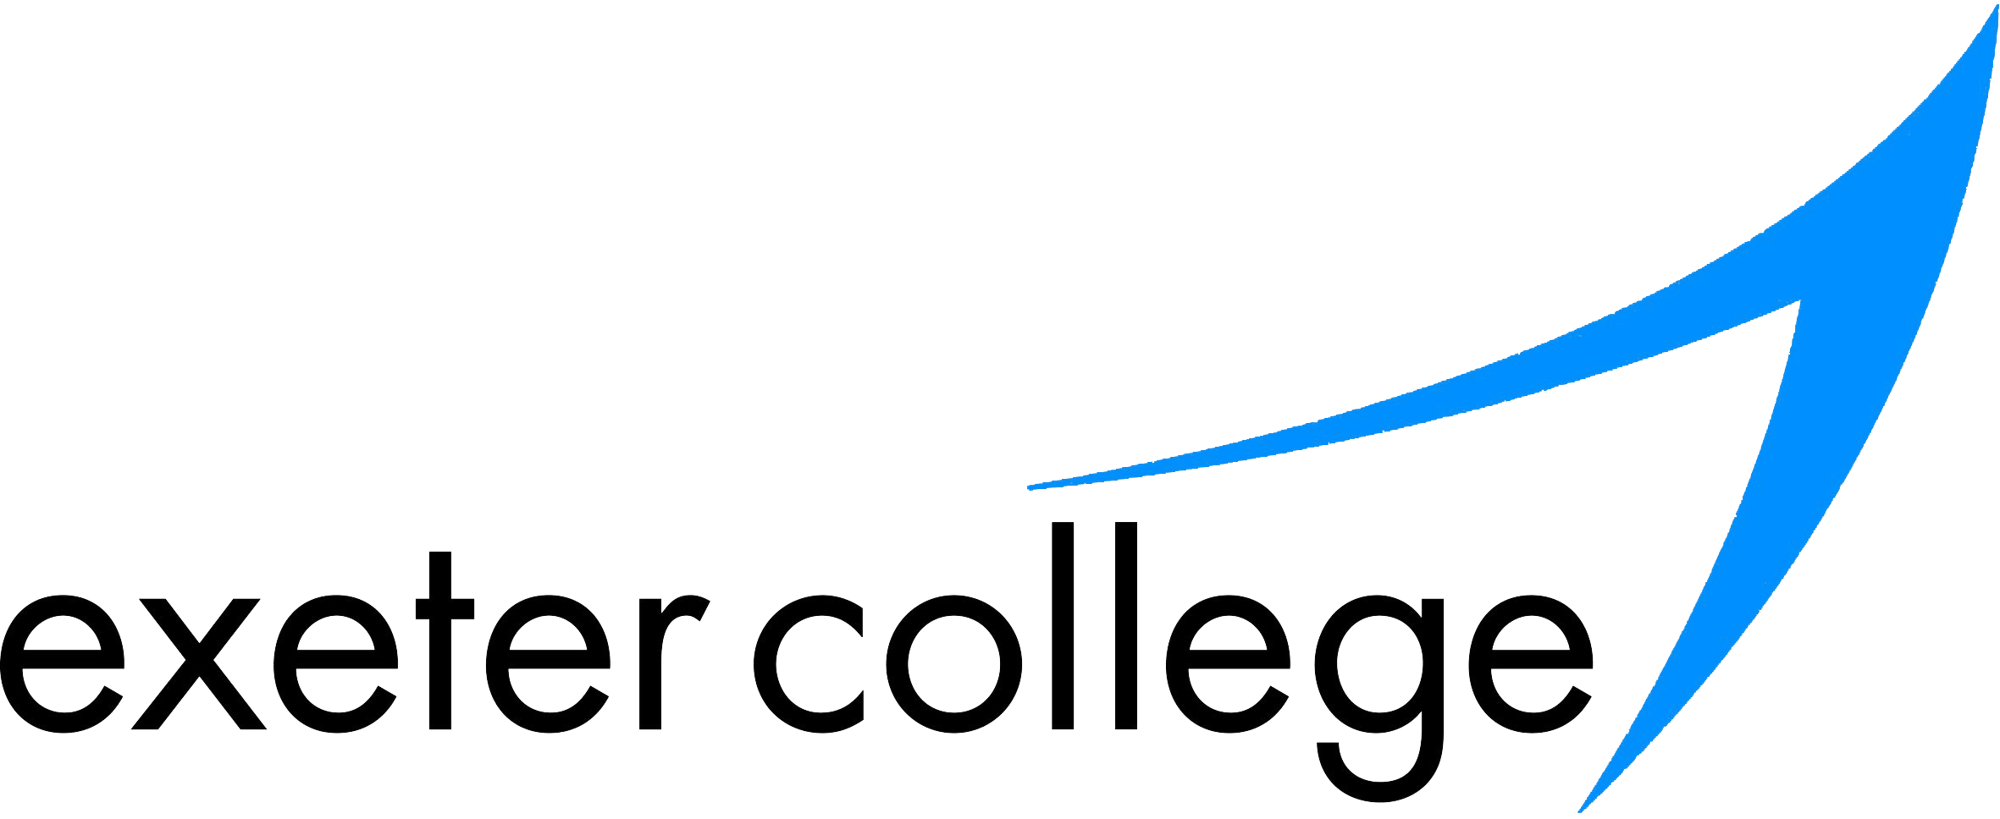 Exeter College logo - no background (1)